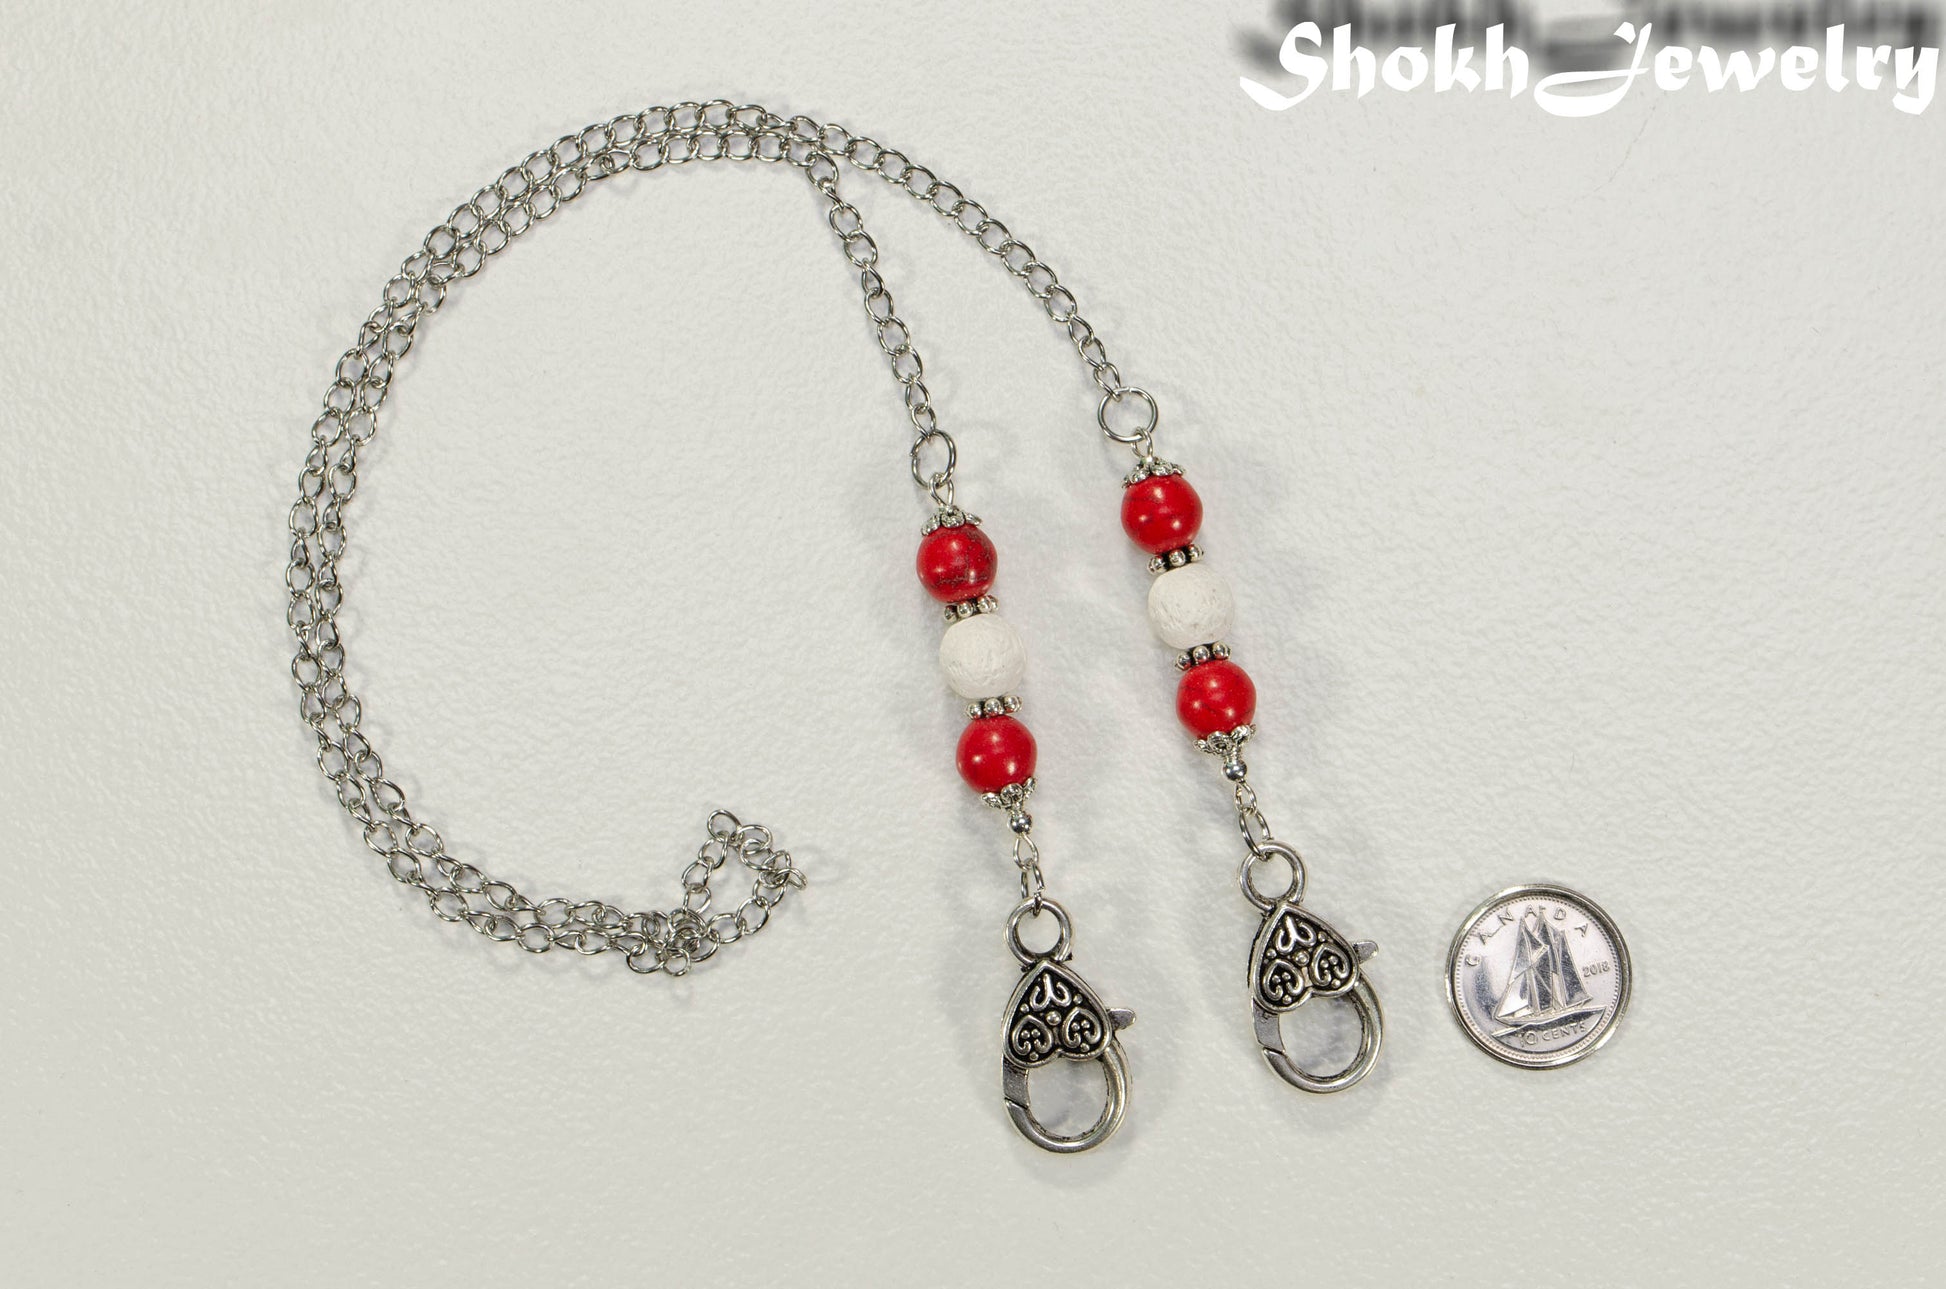 8mm Red Howlite and White Lava Stone Eyeglass Chain. beside a dime.